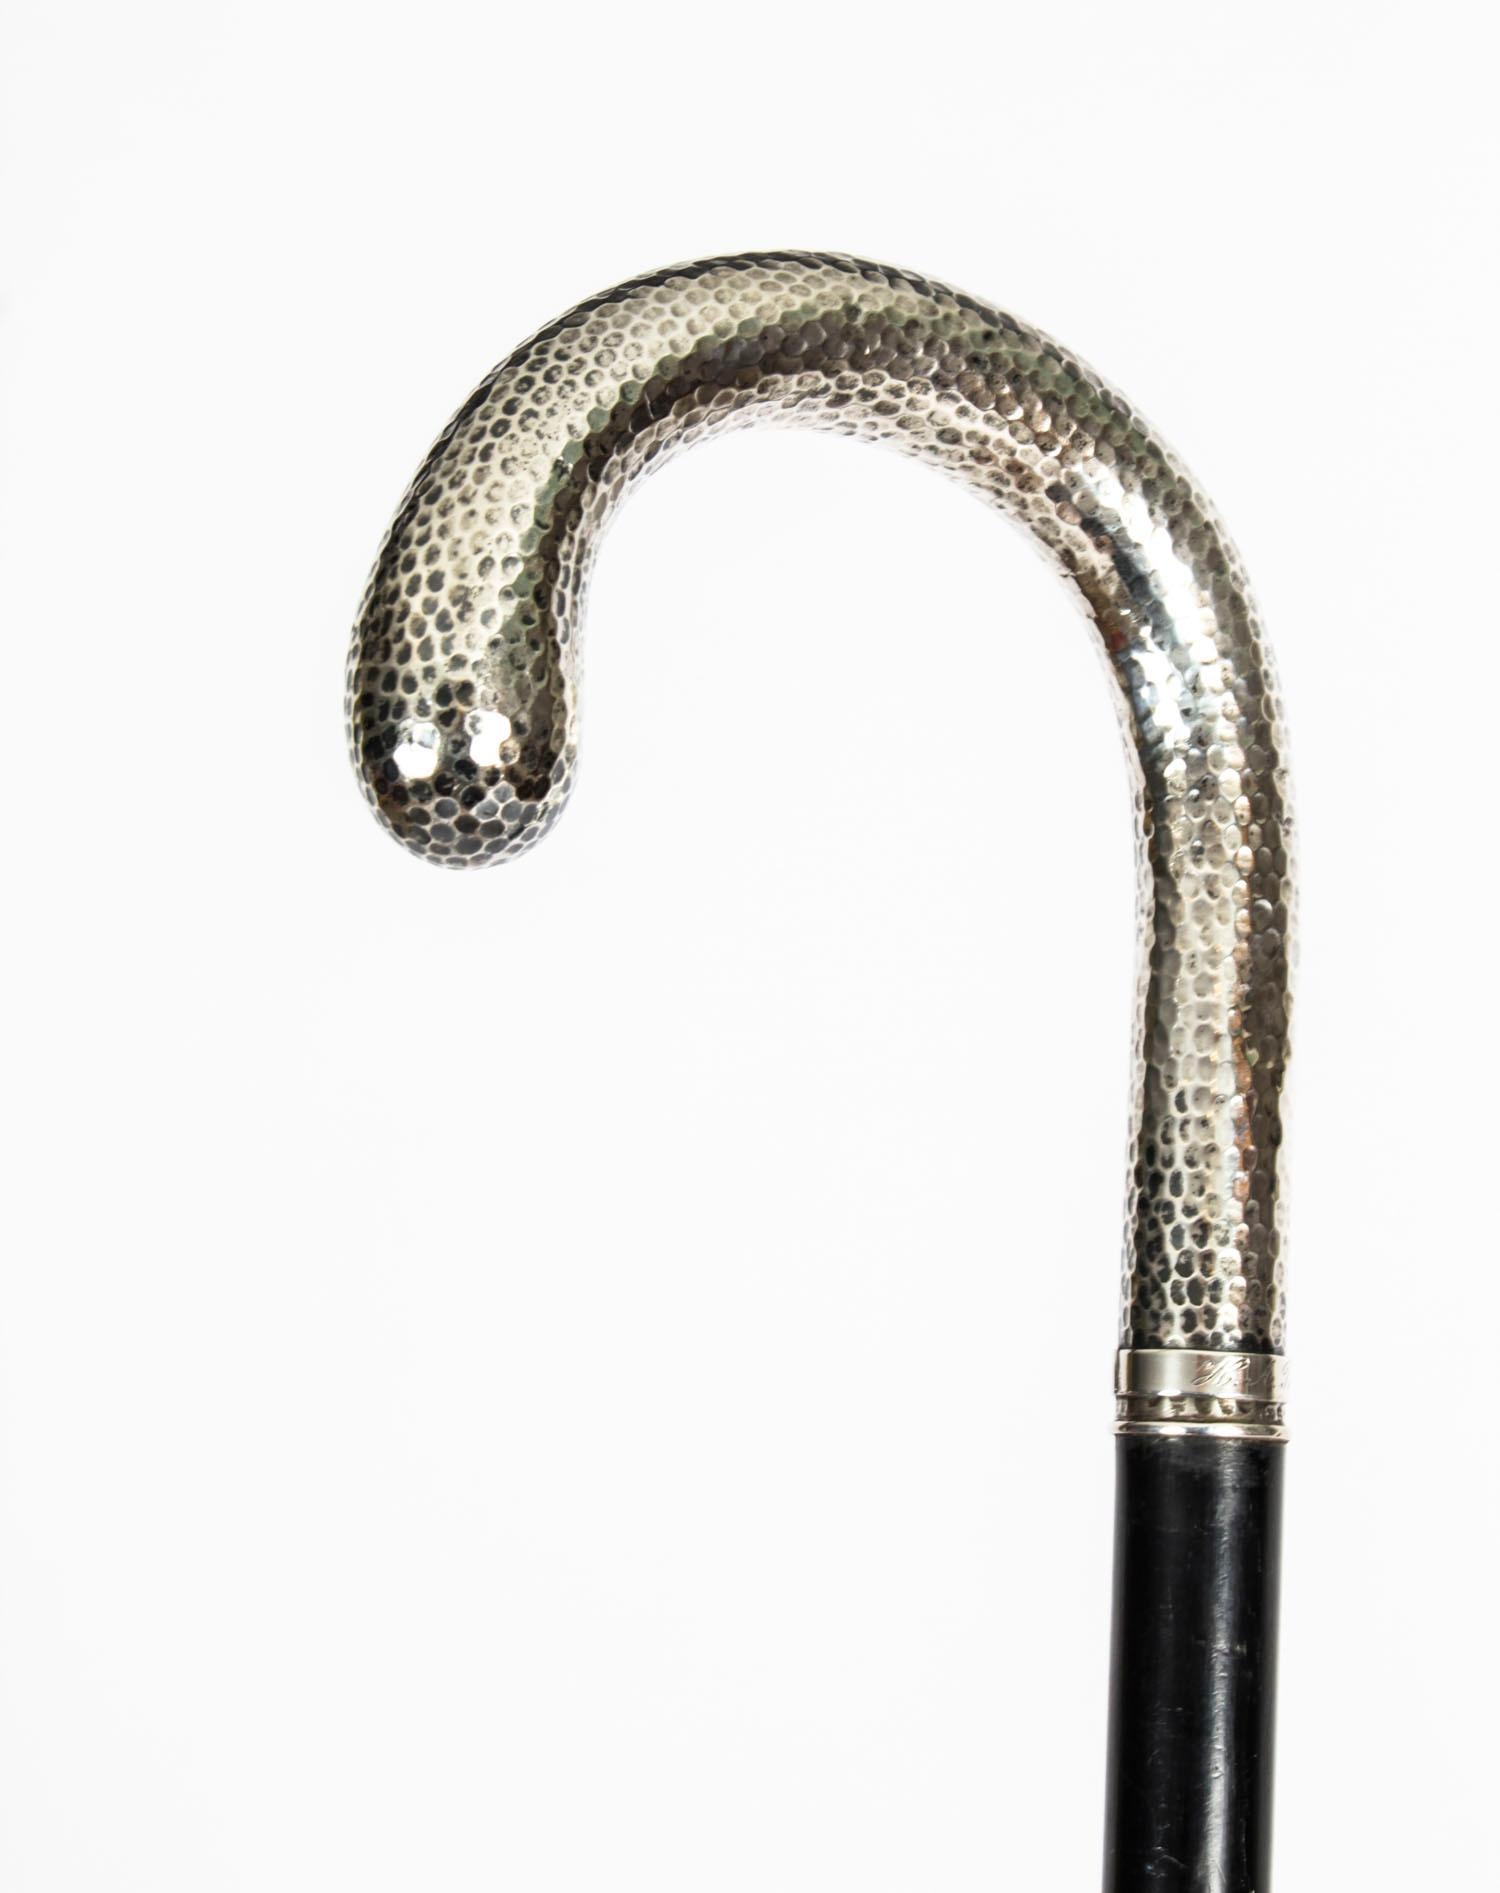 This is a fantastic antique Swedish gentleman's ebonised walking stick with a silver crook handle and bearing Swedish marks, circa 1910 in date.

It has a very decorative sterling silver curved planished crook handle with a plain band signed in